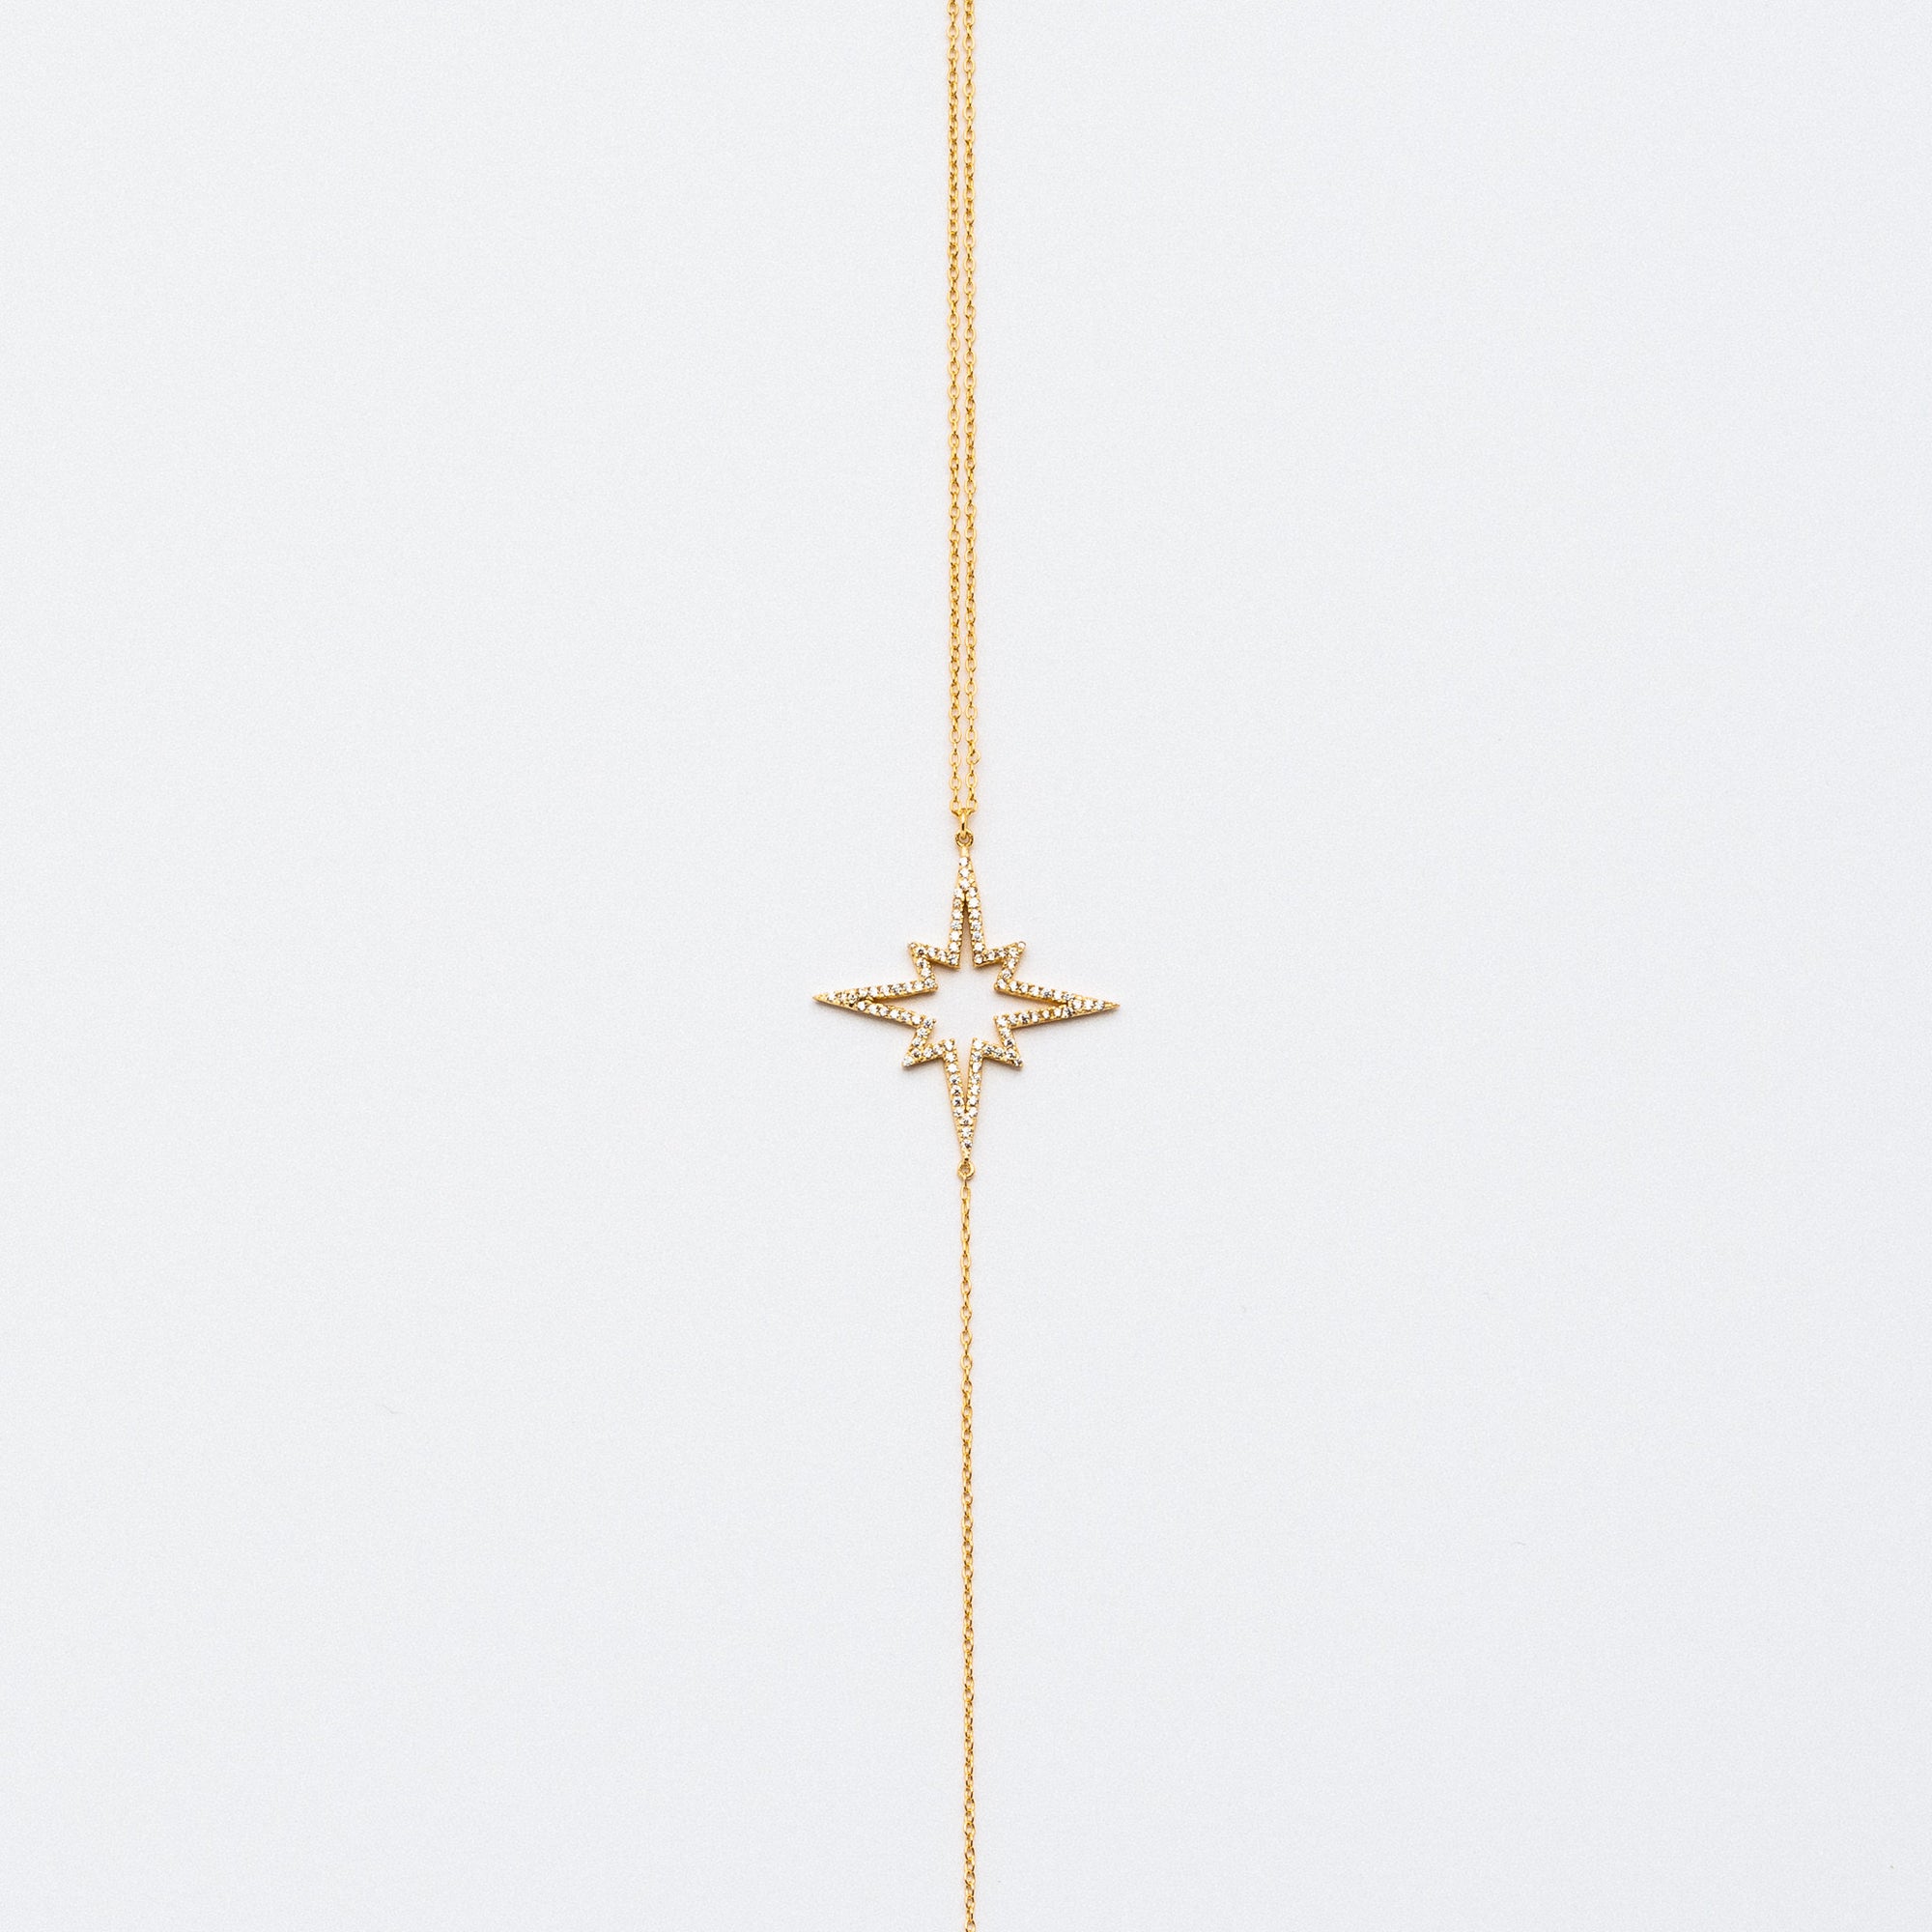 NSC - Star Lariat Necklace